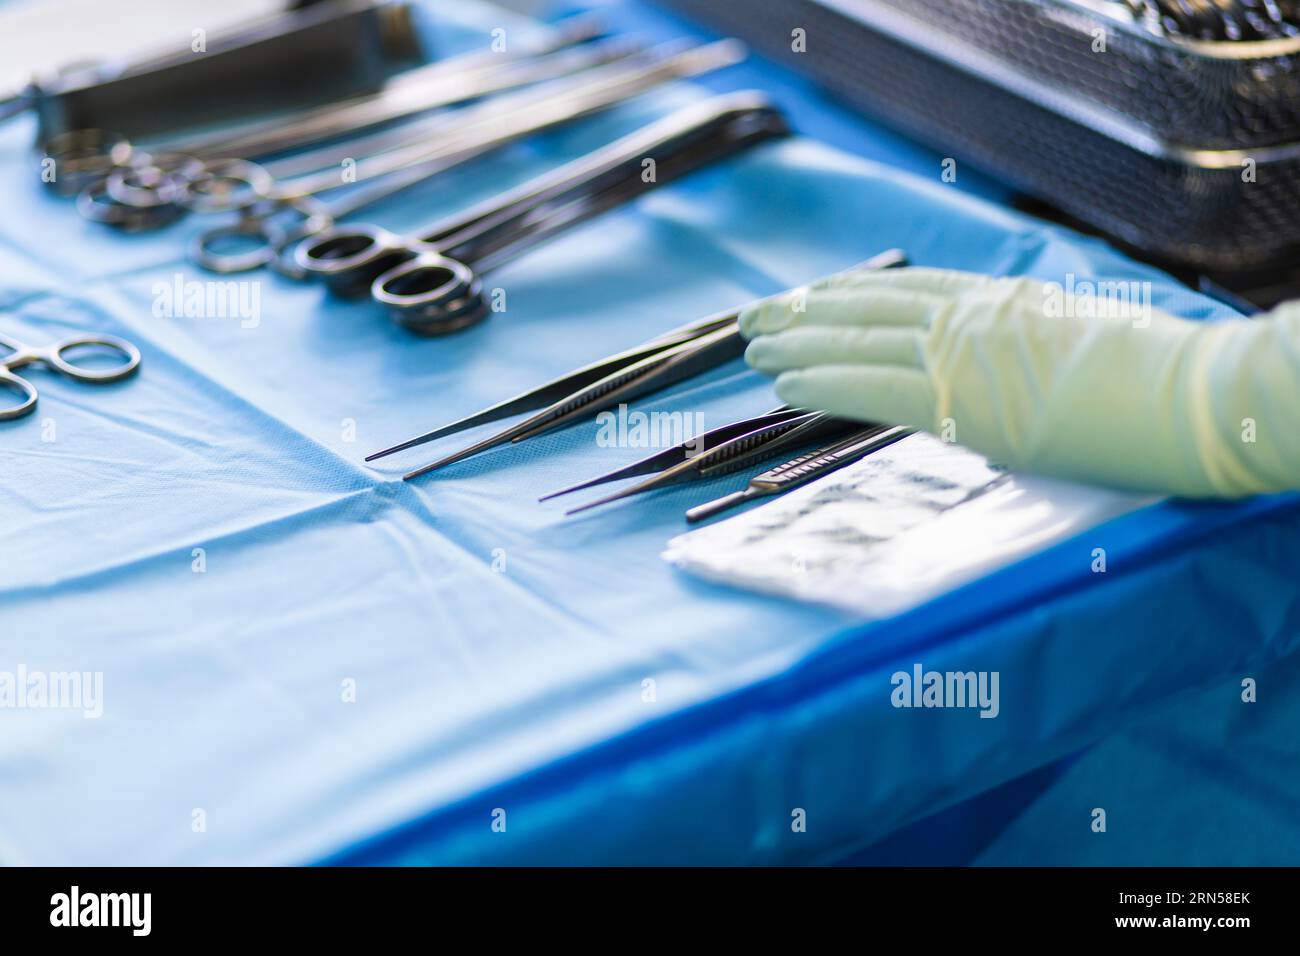 A hand reaches for a pair of tweezers in an operating theatre Stock Photo